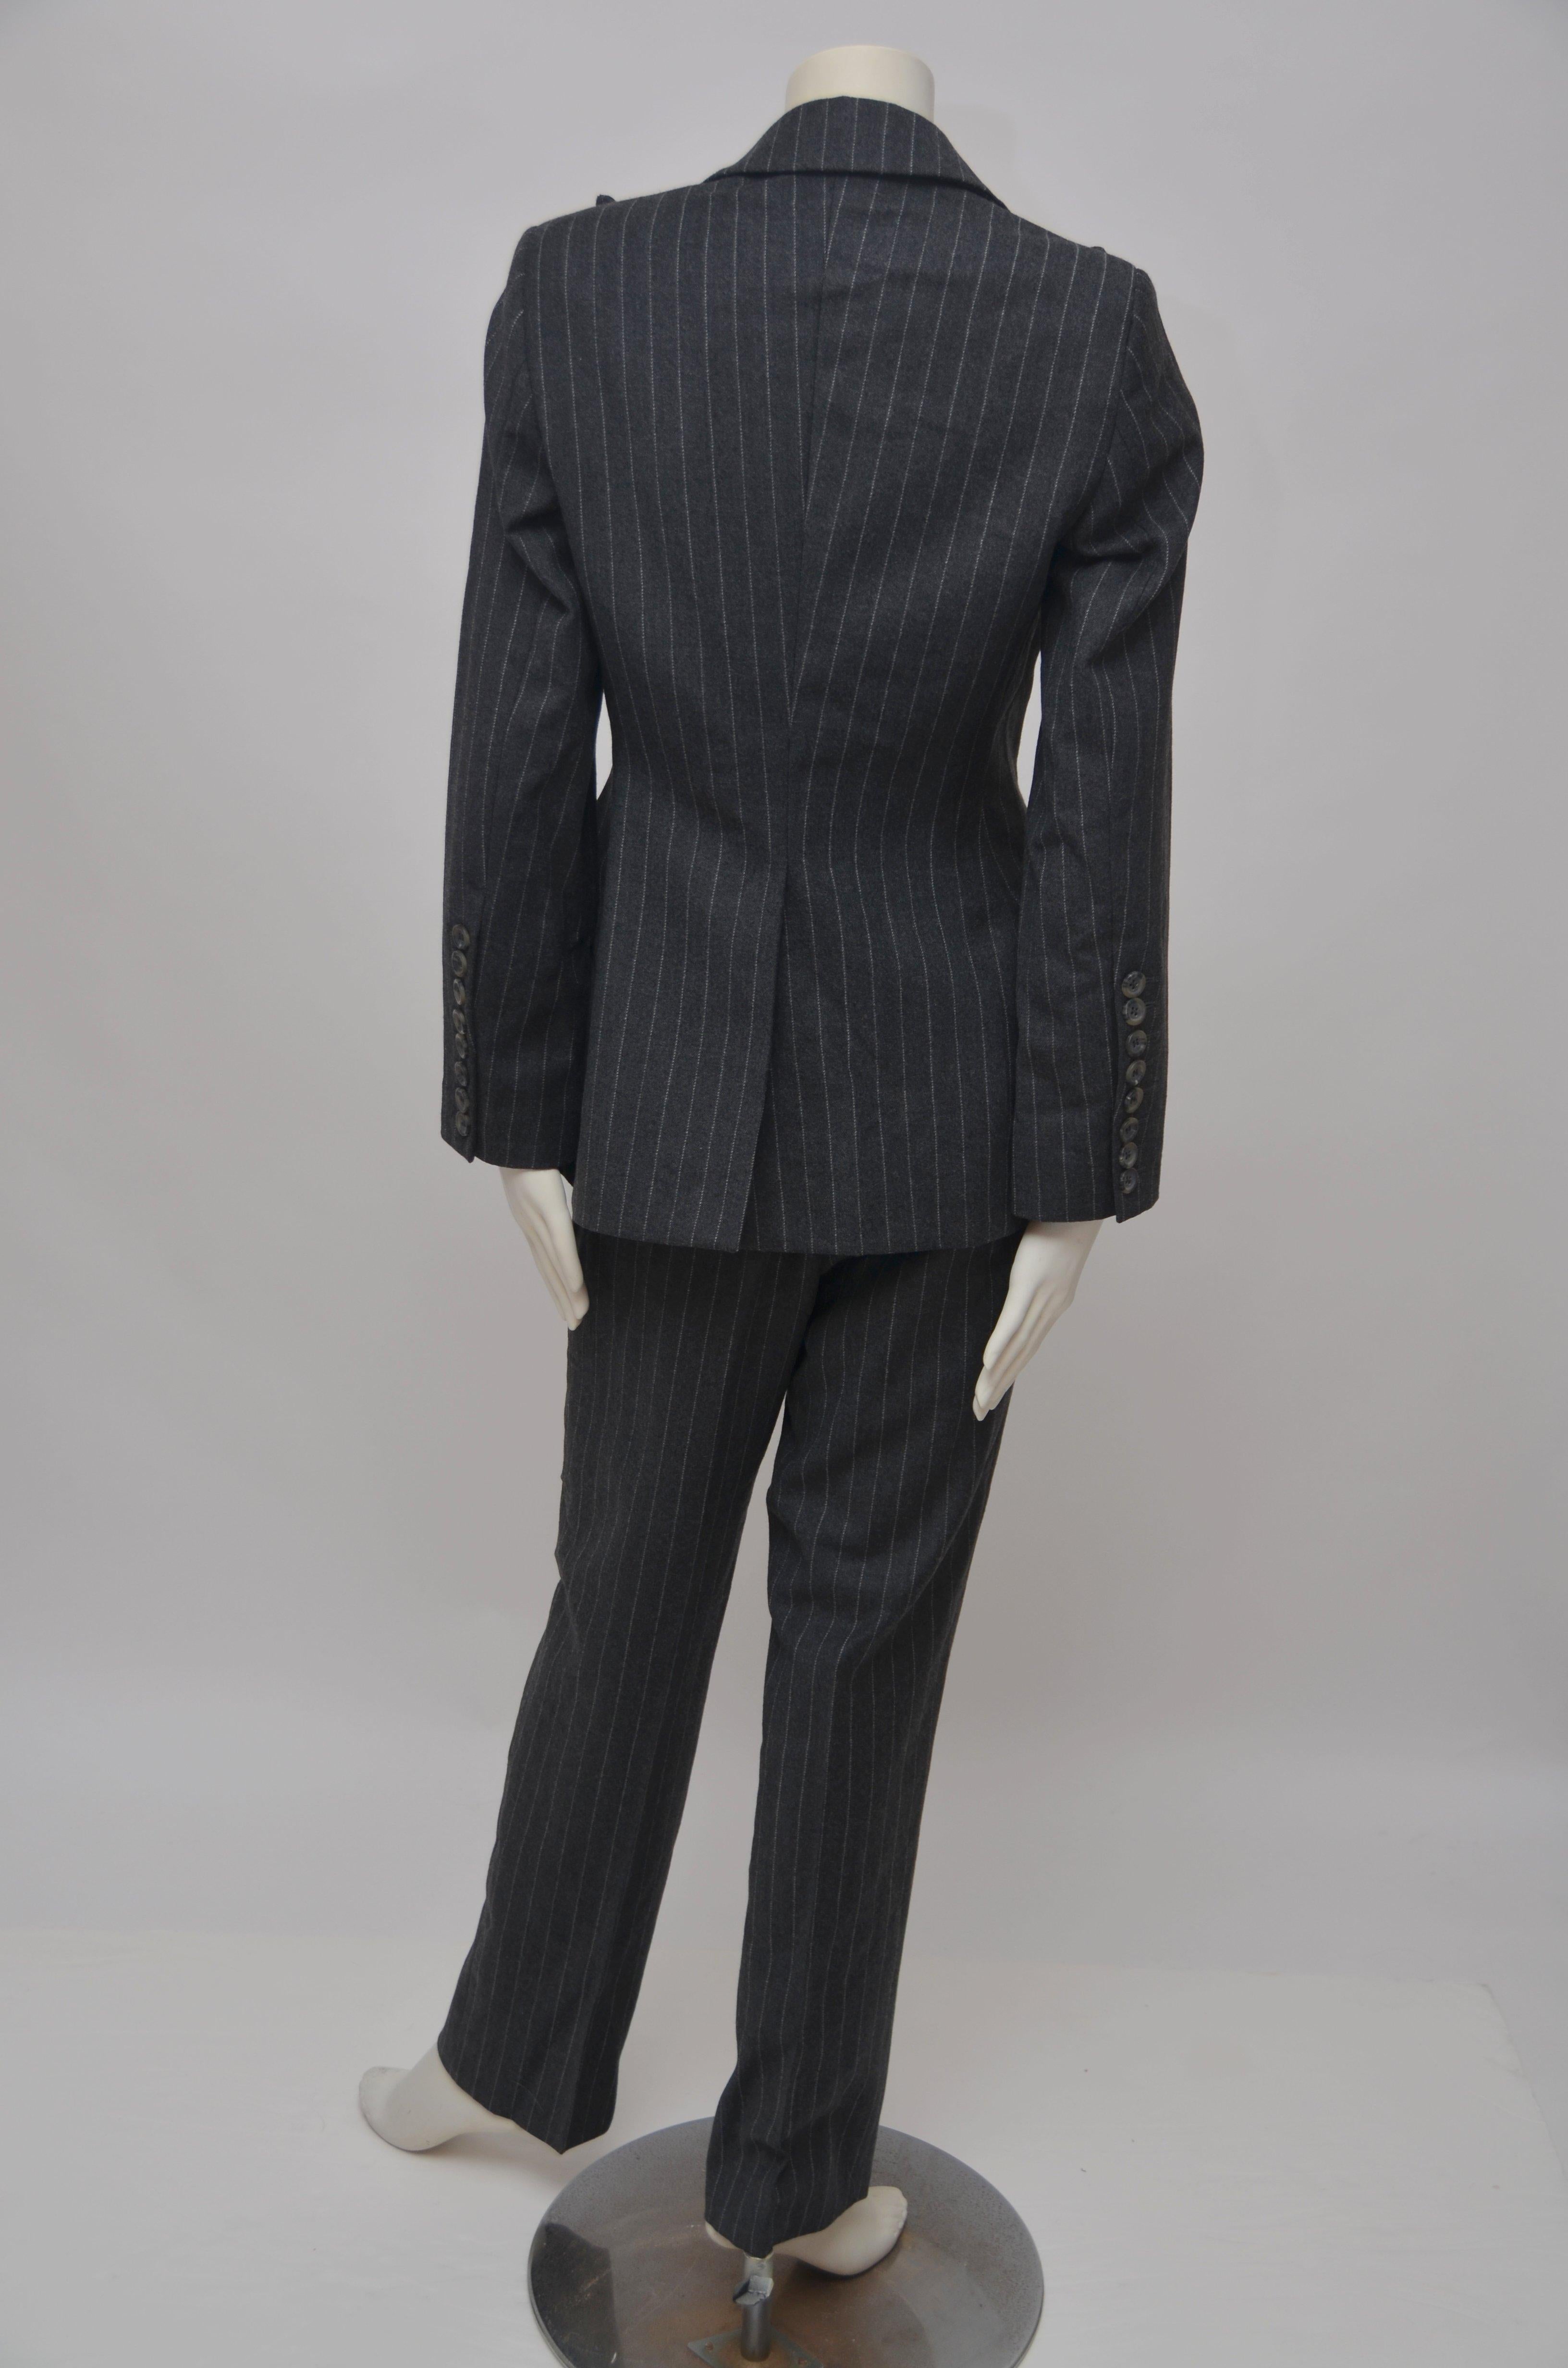 ALEXANDER McQUEEN A/W 1996  Suit  With Hair / Birth Label
The label inside: a single lock of hair suspended within a clear plastic pocket. 
McQueen used these hair labels in some of his early collections including Banshee, Autumn/Winter 1994 and The